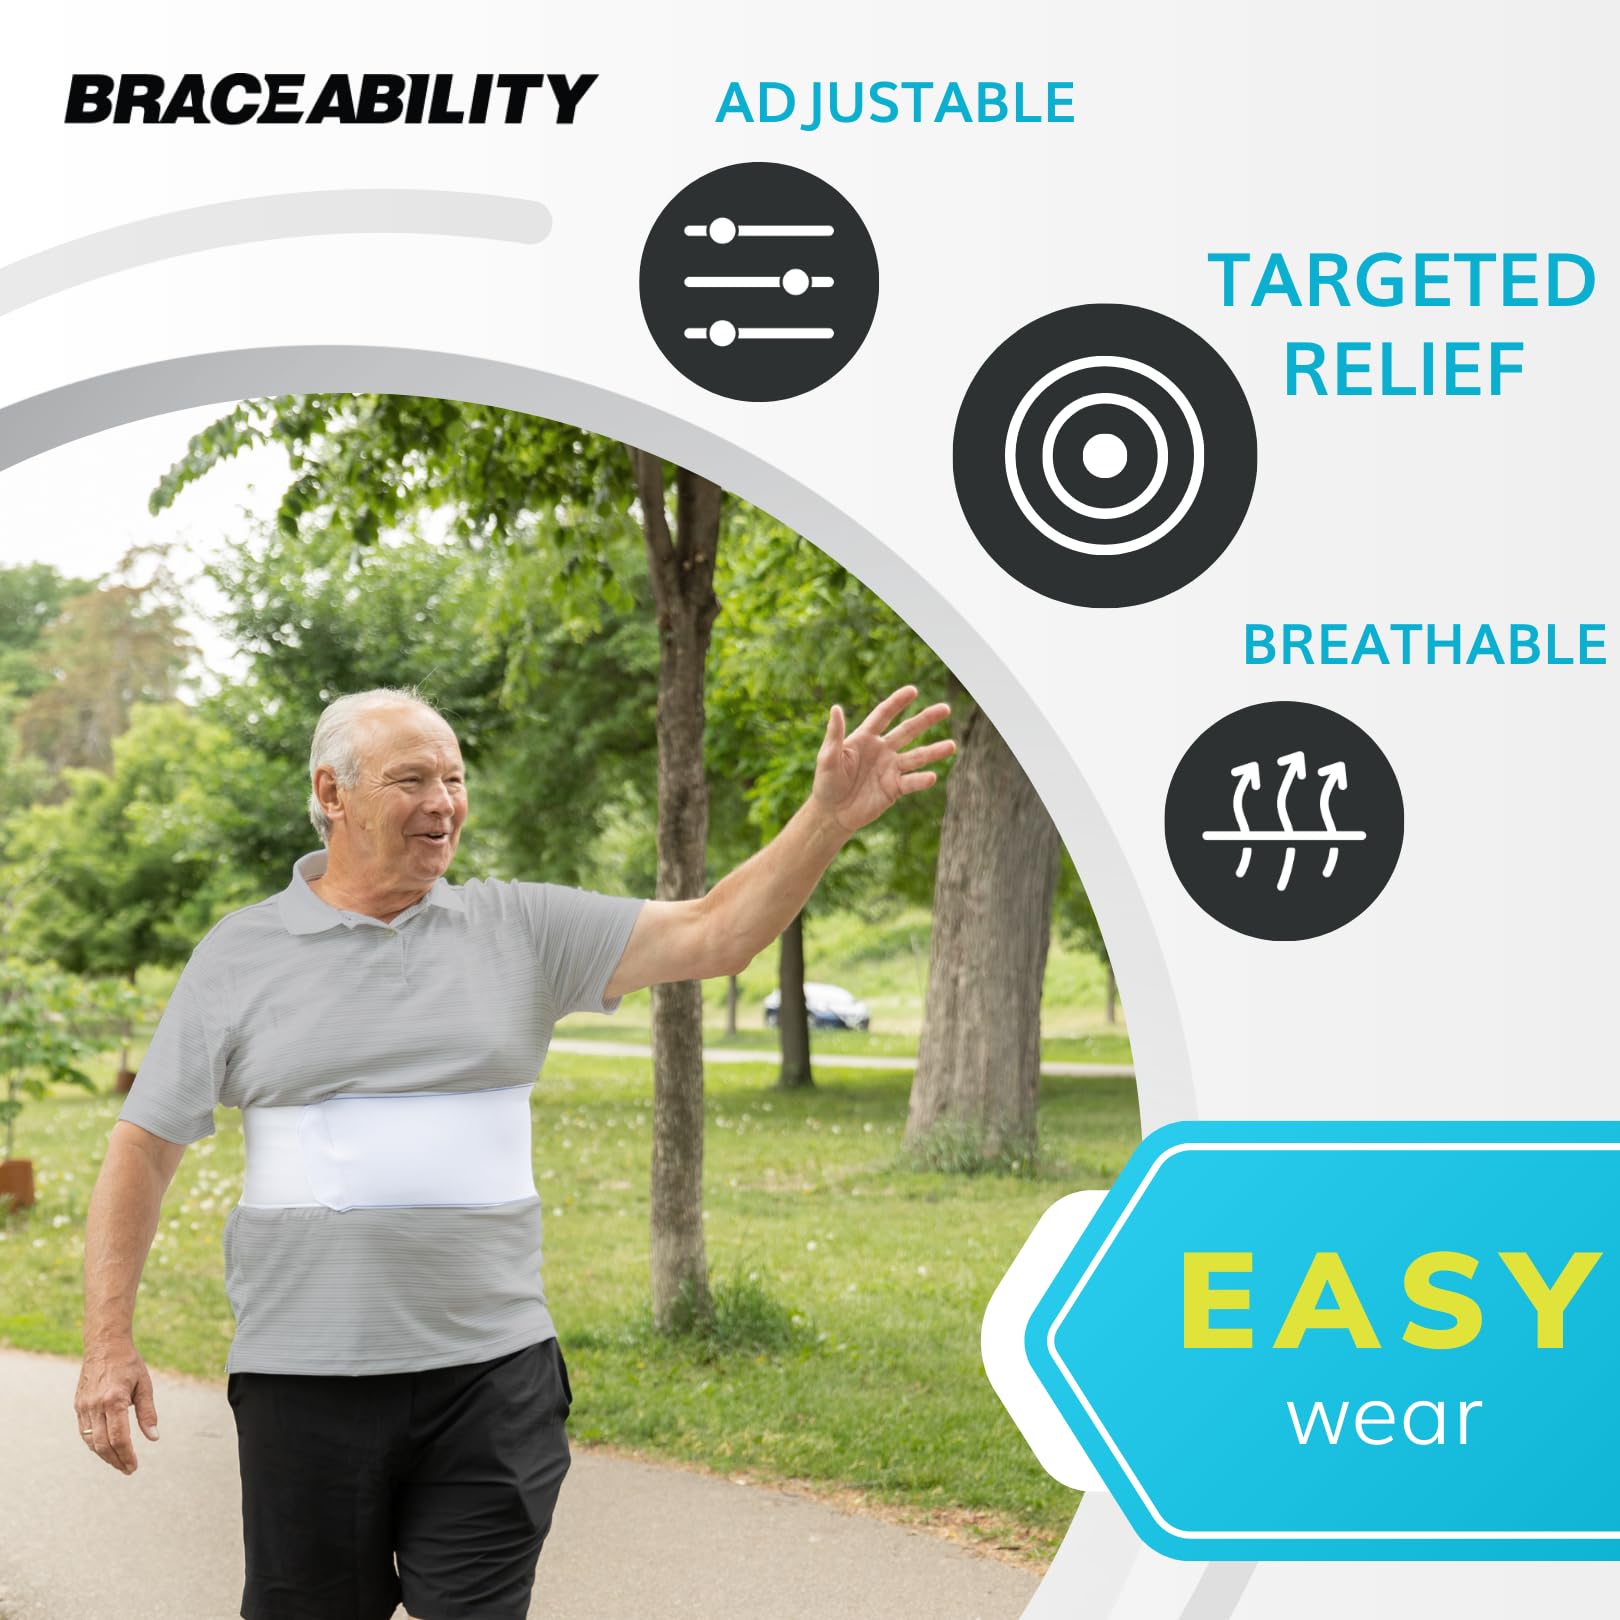 BraceAbility Rib Injury Binder Belt - Female Universal Broken Rib Brace for Cracked Ribs, Rib Cage Protector Wrap for Sore or Bruised Support, Sternum Injury for Women (Fits 36”-58”)